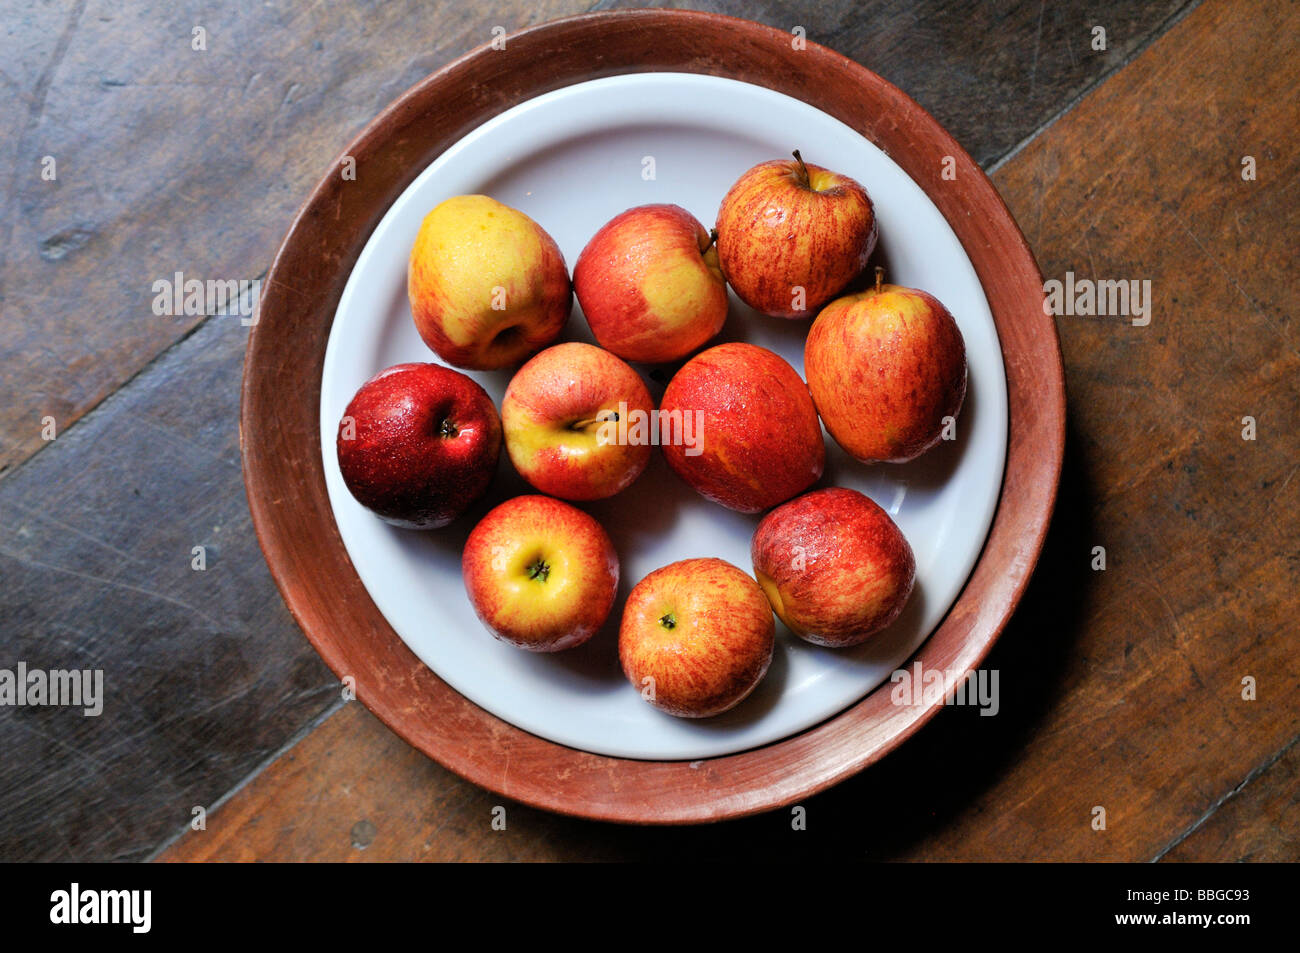 Apples on a Plate Stock Photo